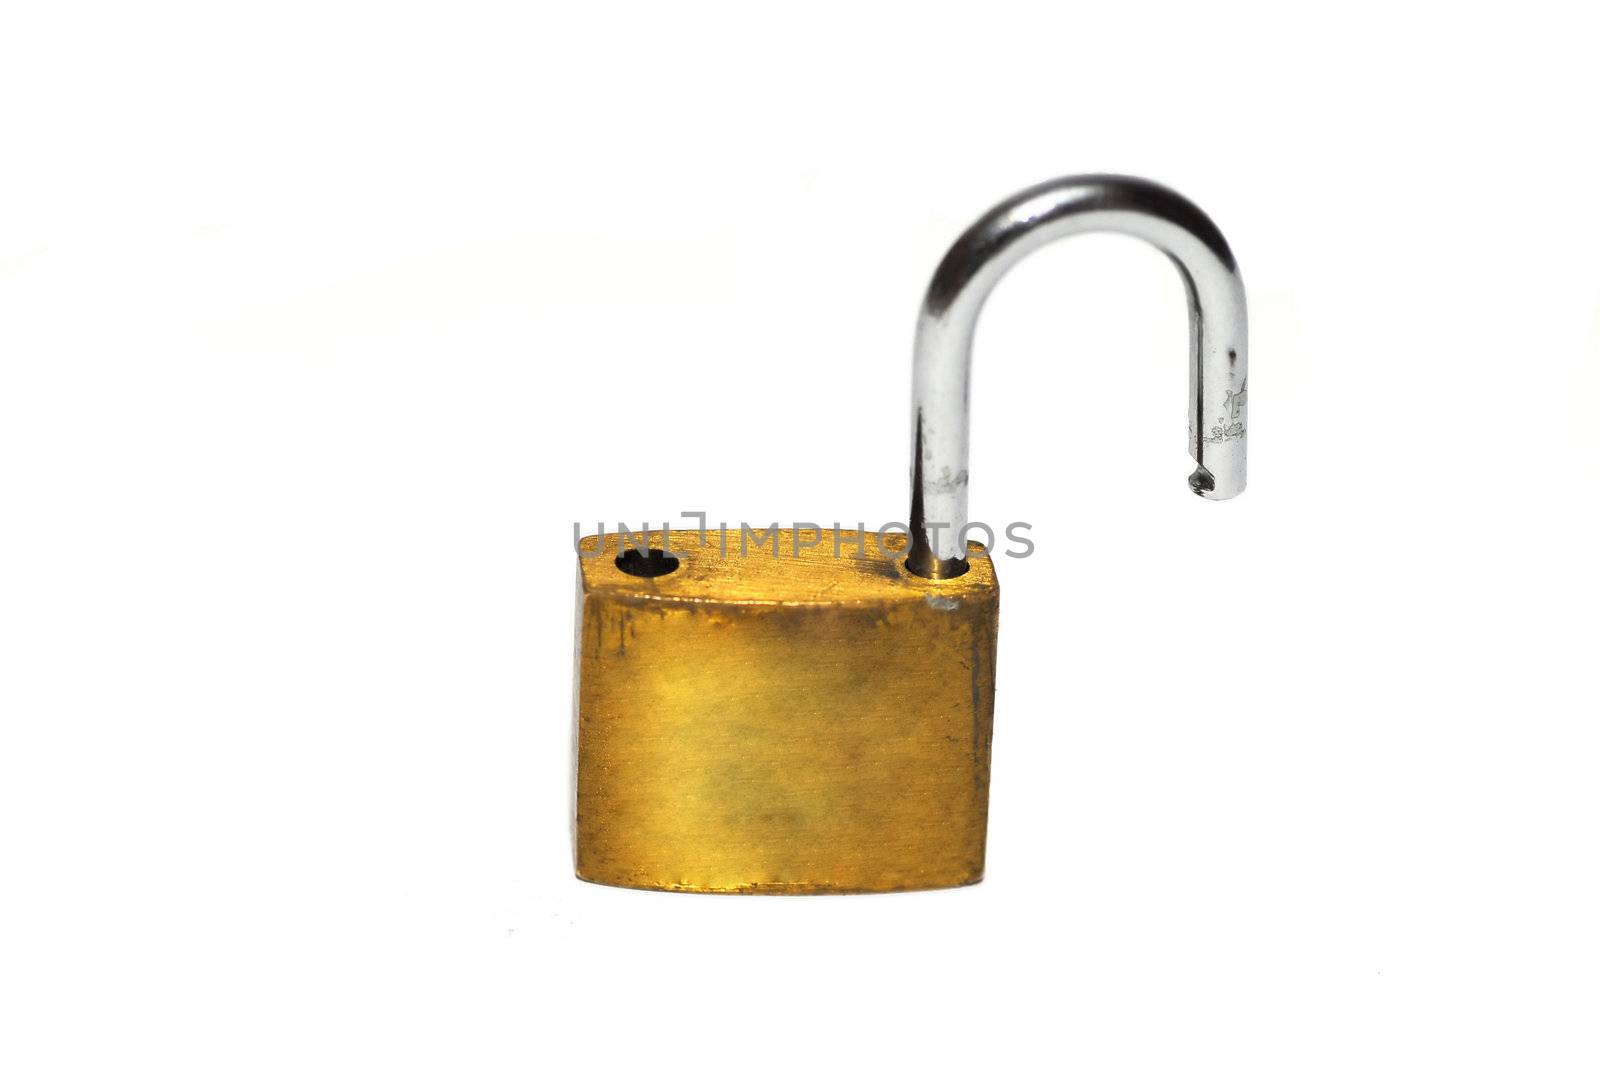 A padlock concept of data security, isolated on white